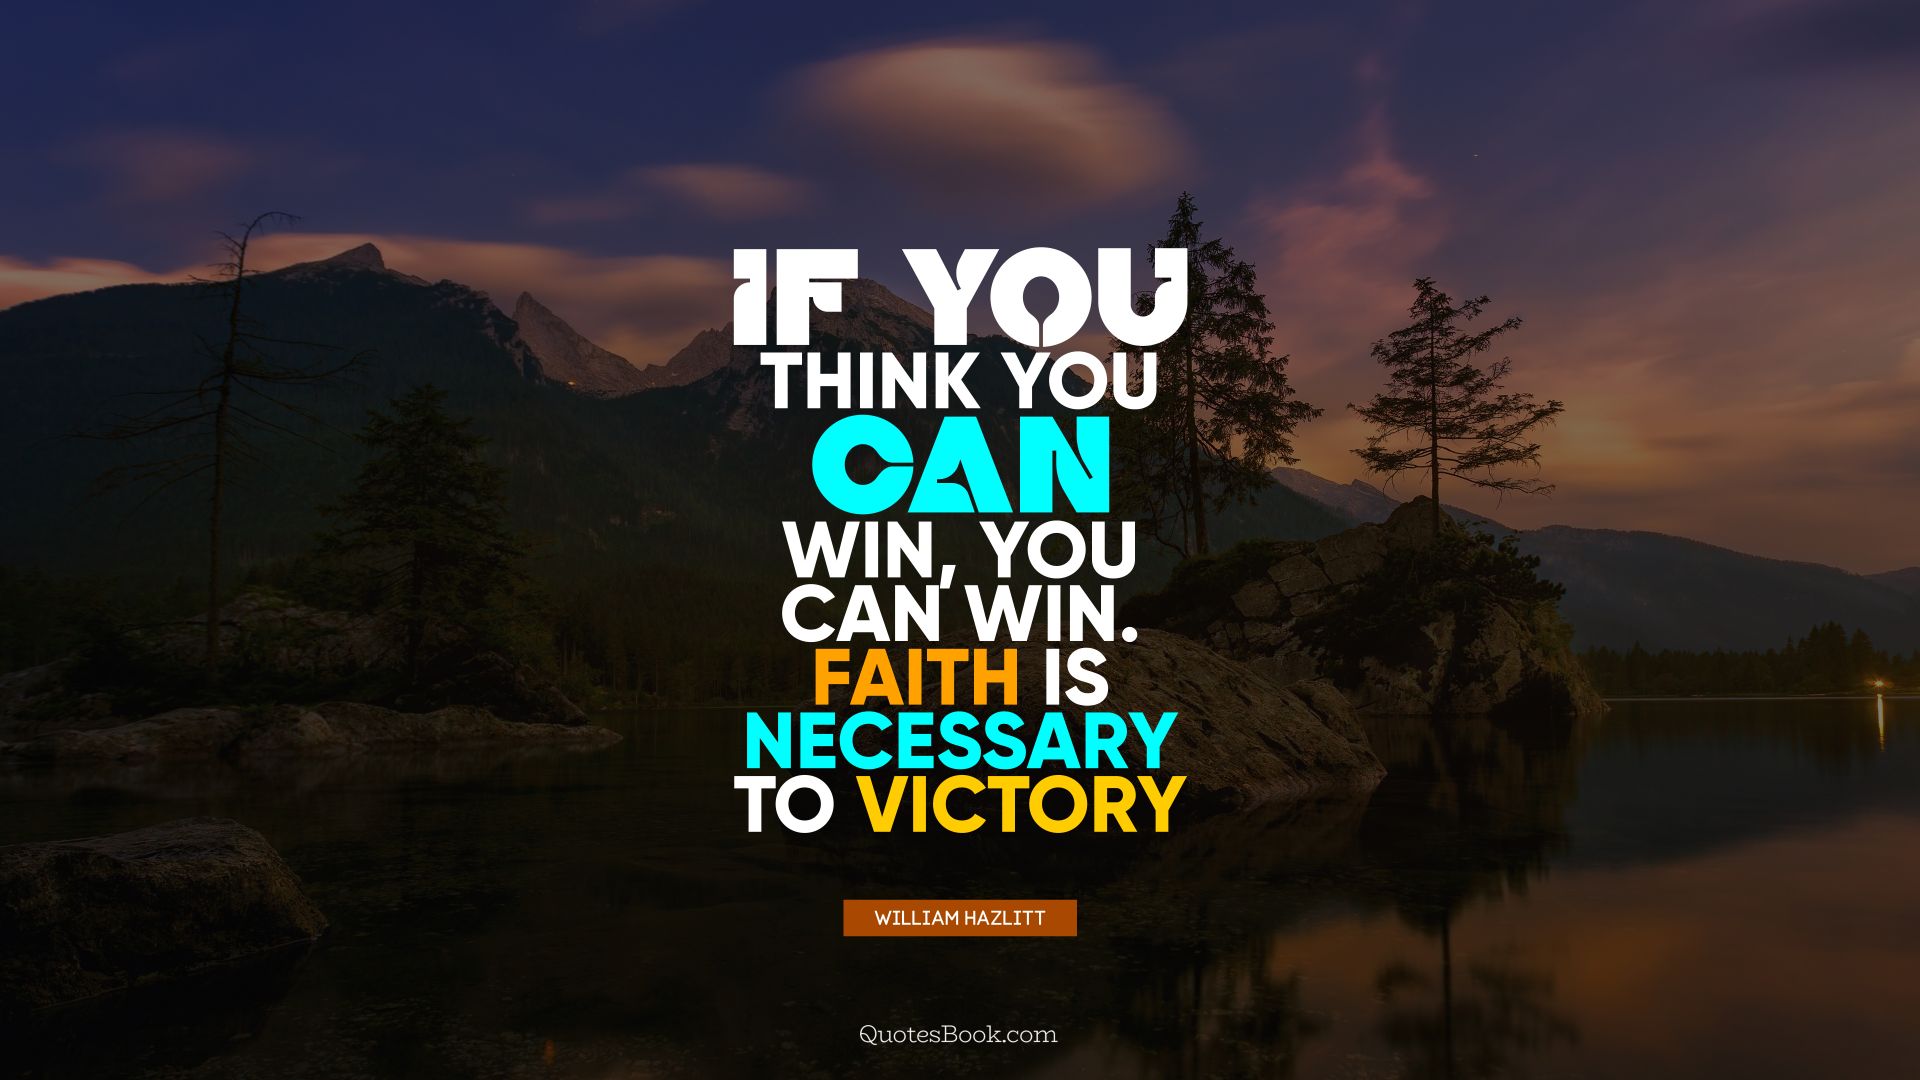 If you think you can win, you can win. Faith is necessary to victory. - Quote by William Hazlitt